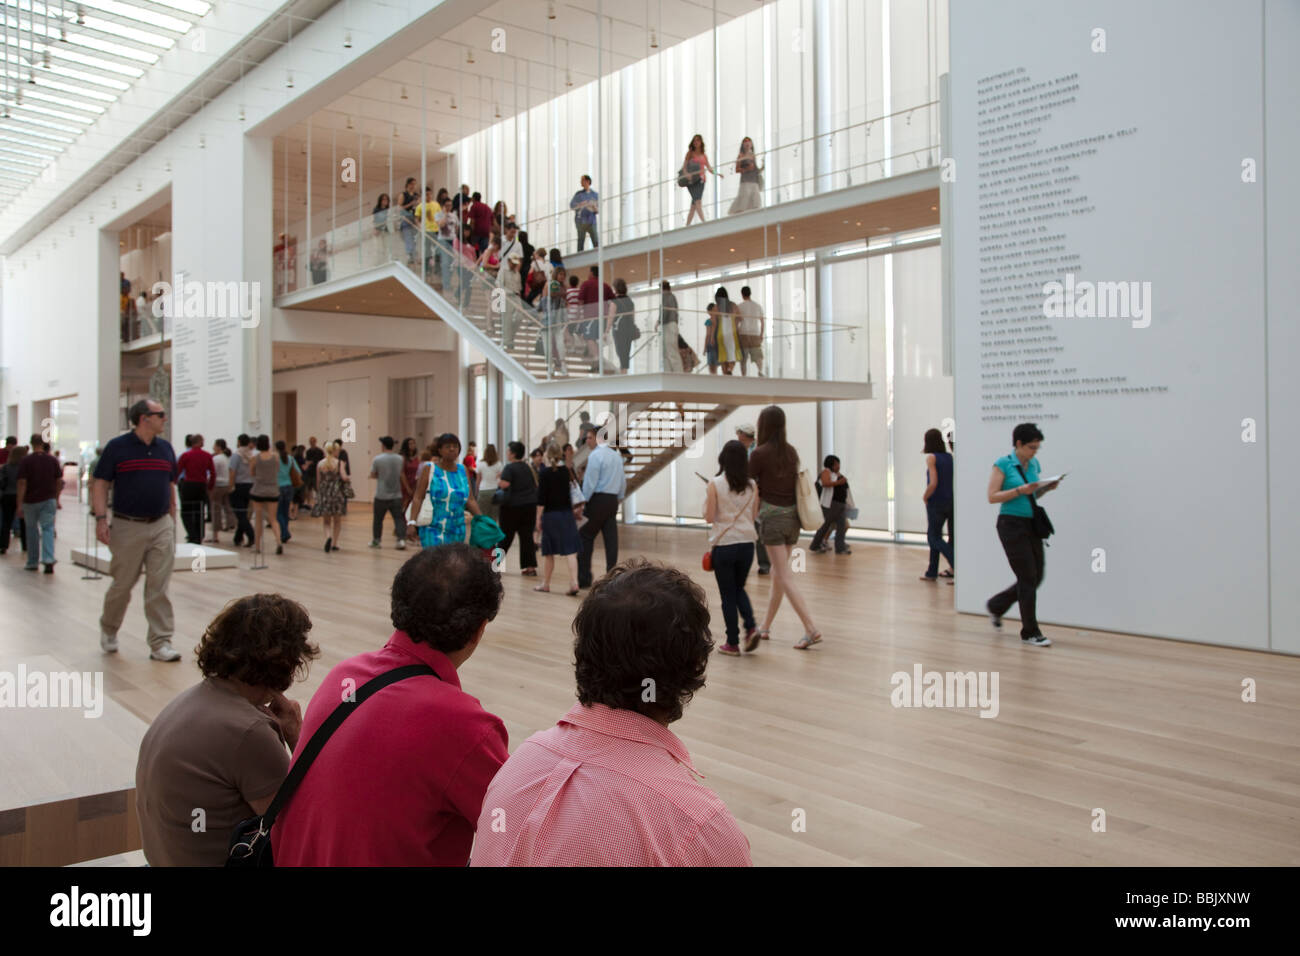 CHICAGO Illinois Visitors sit on benches in Griffin Court lobby of Modern Wing addition to Art Institute museum stairs Stock Photo